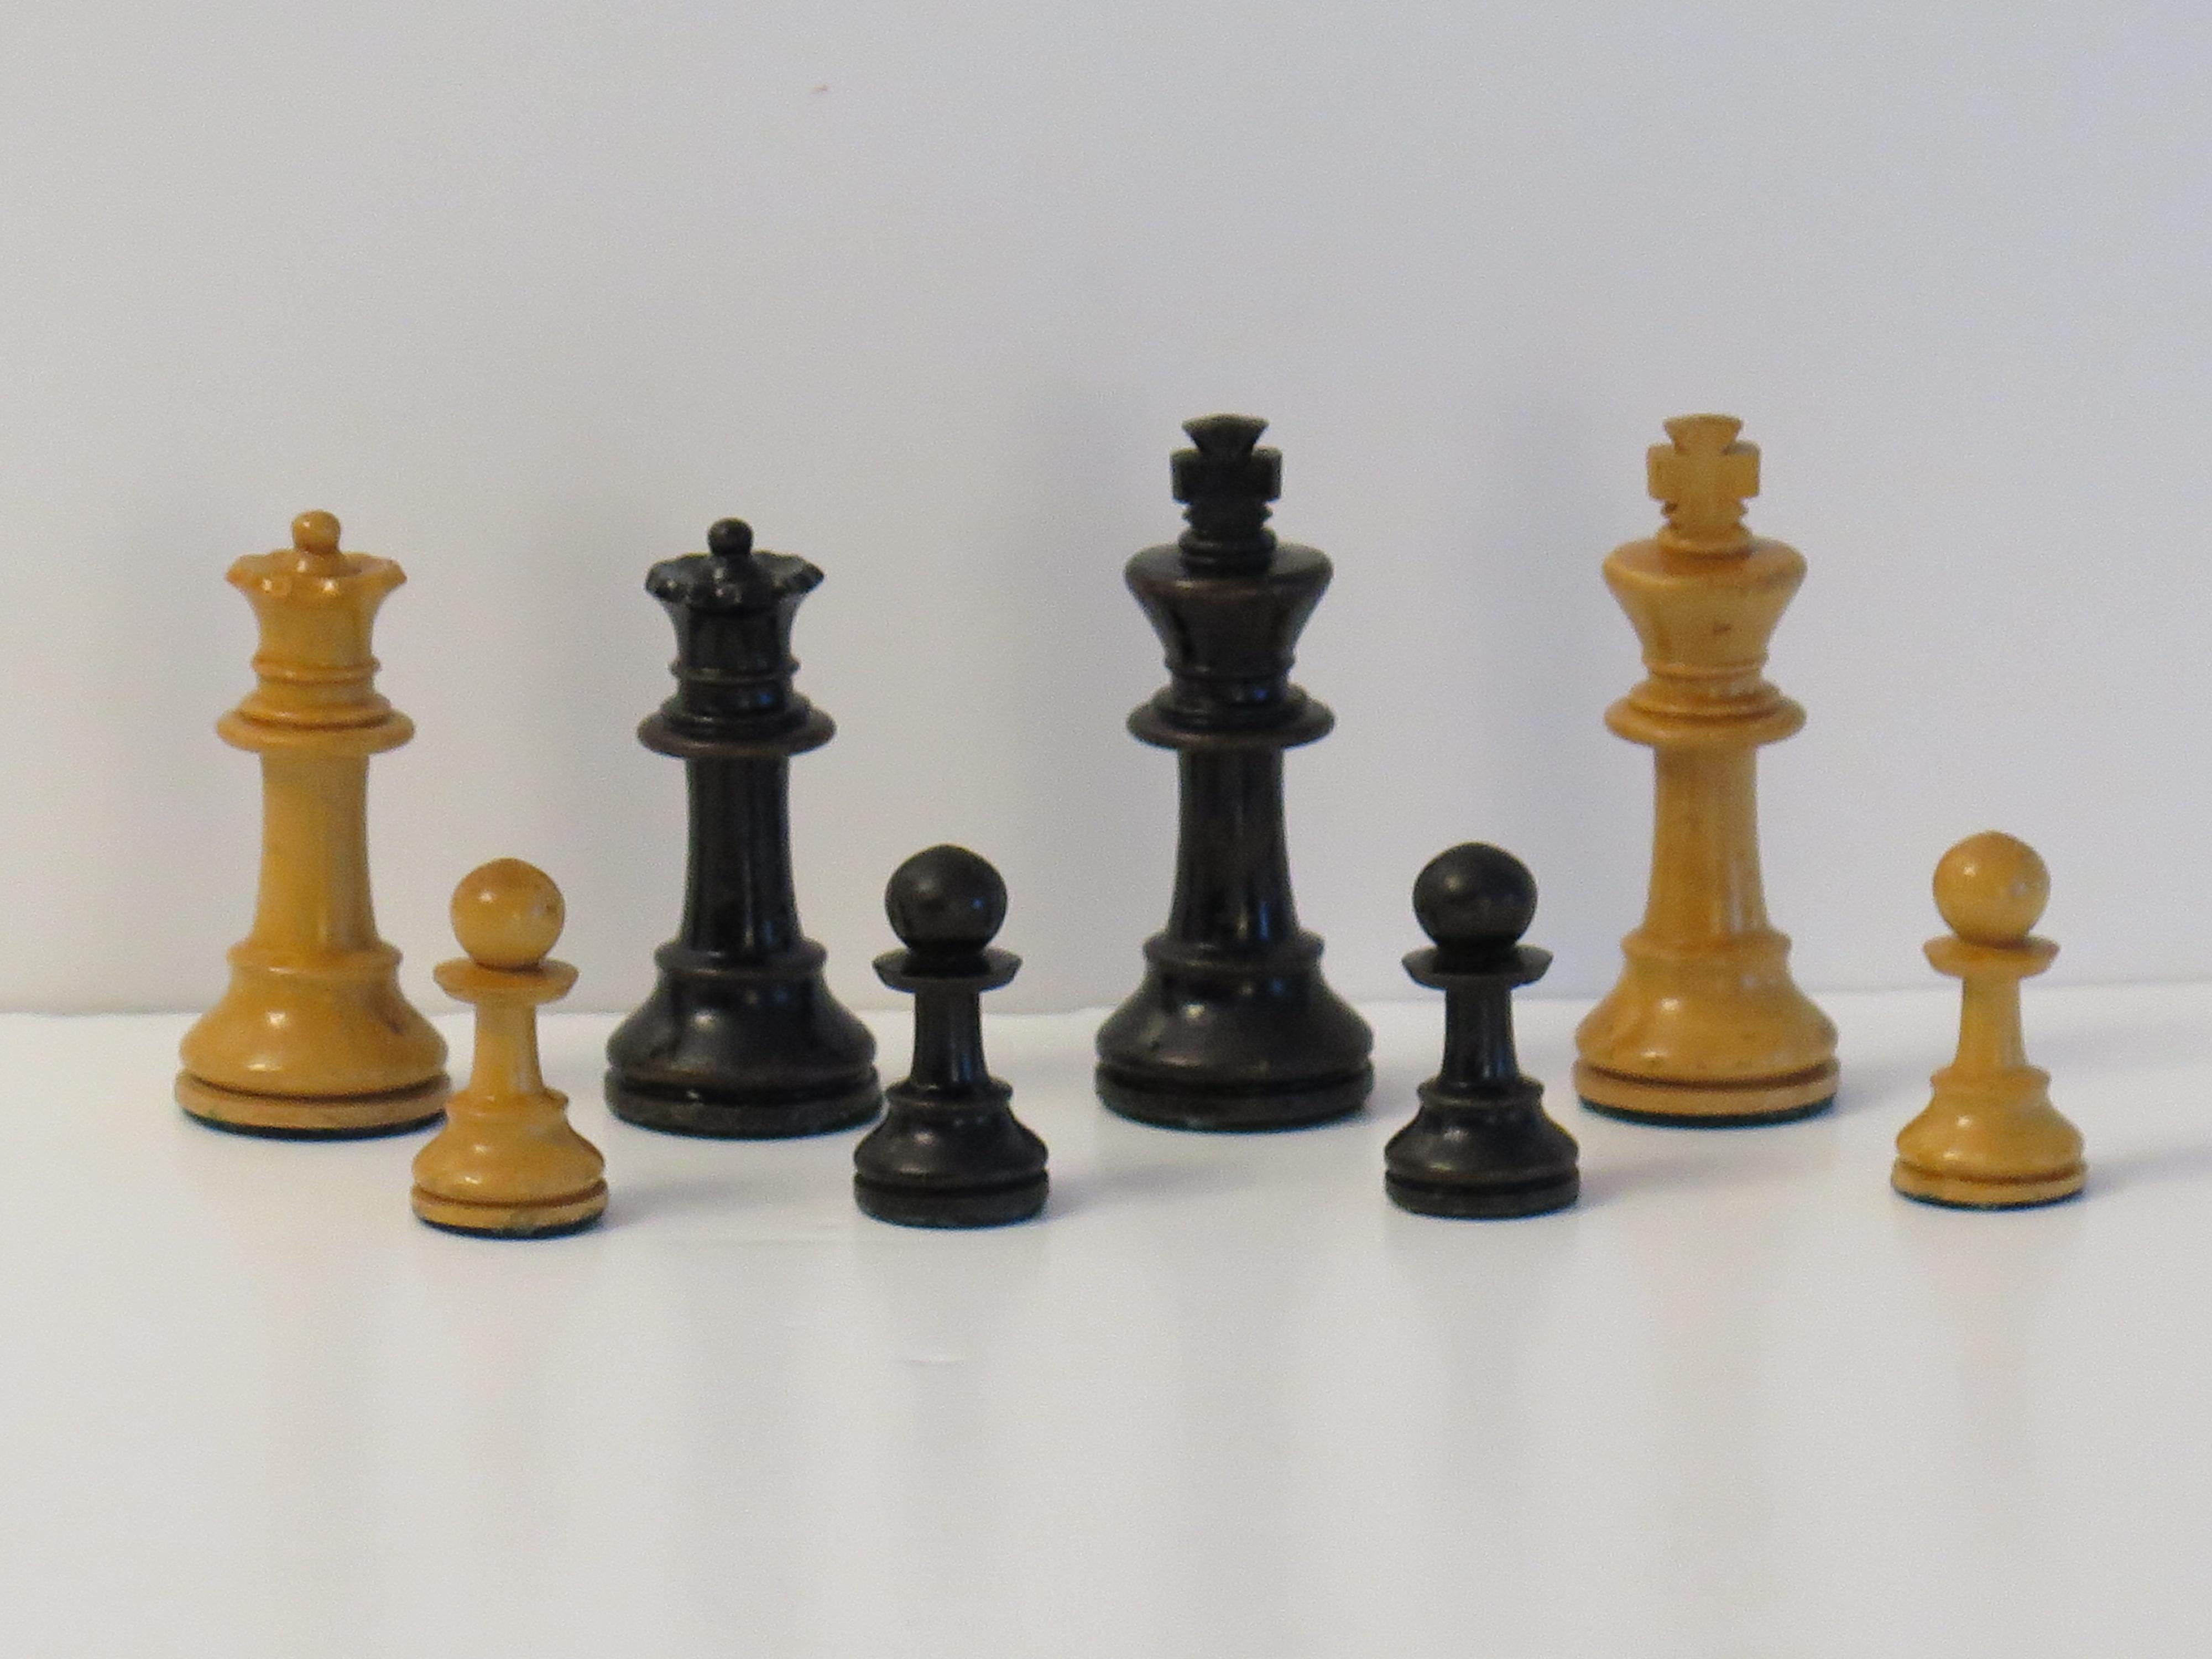 Staunton Fierce Knight Weighted Club Chesss Set 8.5cm Kings Jointed Box, 19th C en vente 1